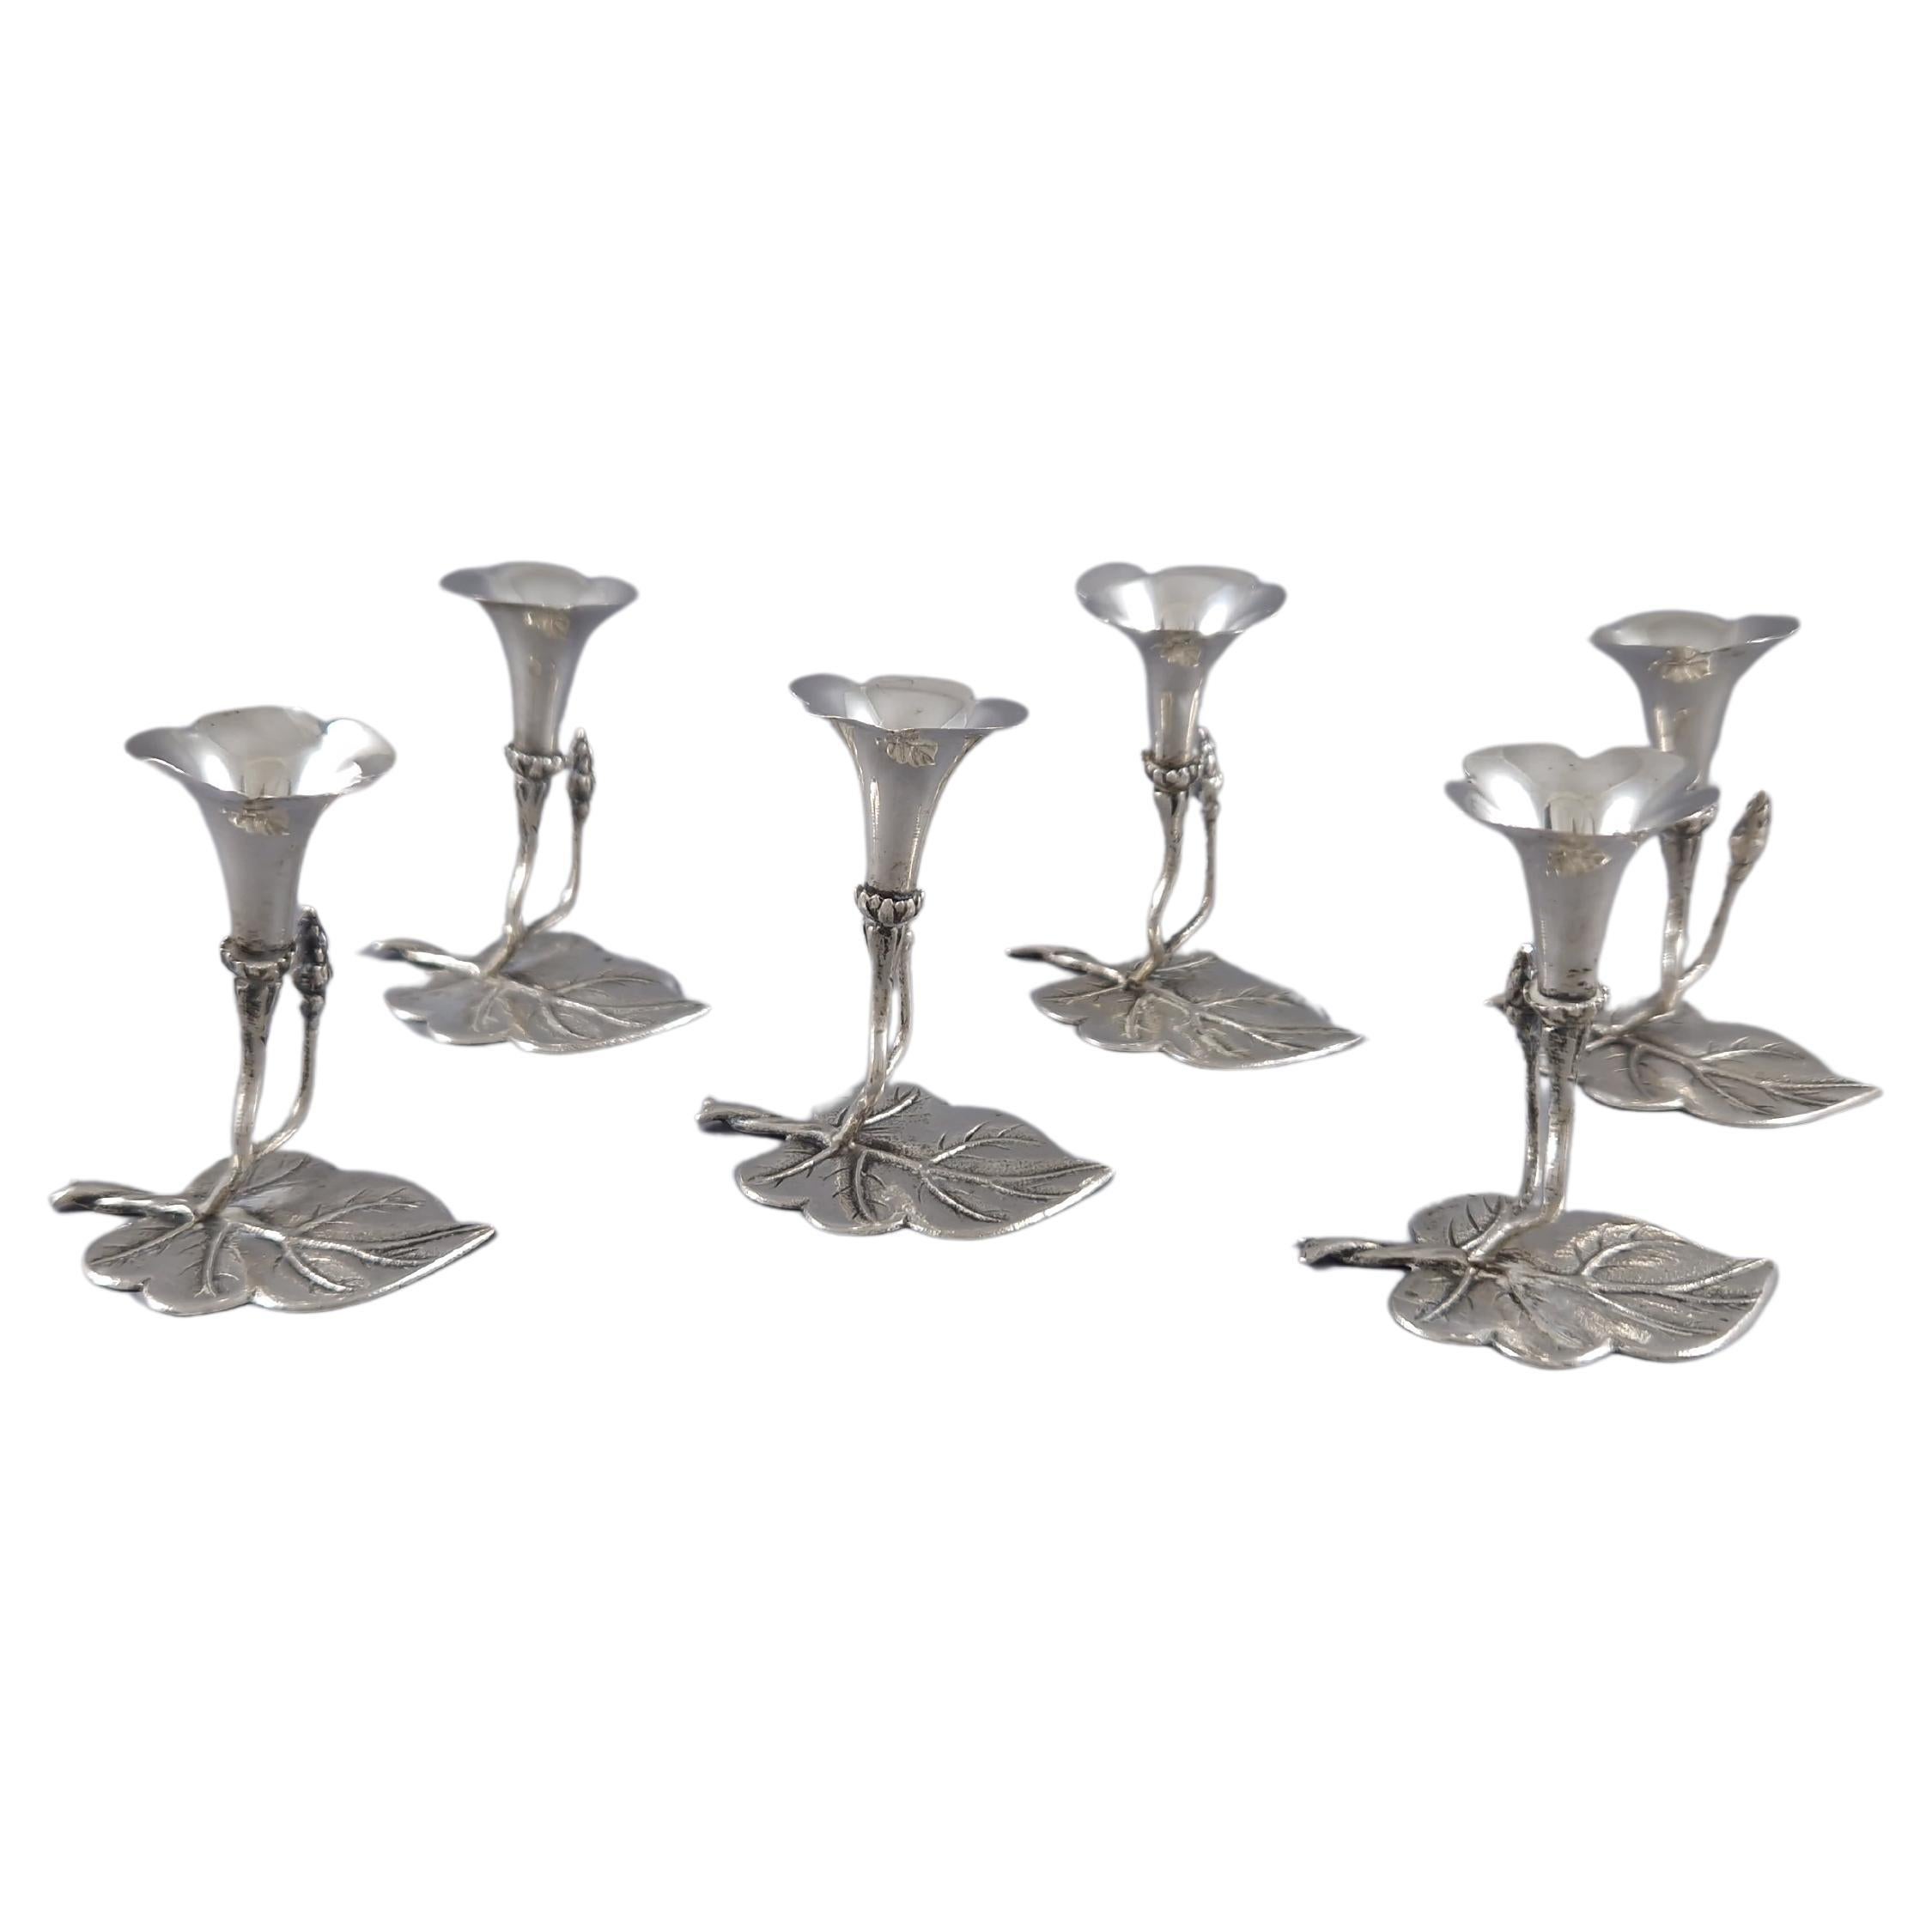 6 Place Card Holders / Bouquet Doors in Sterling Silver